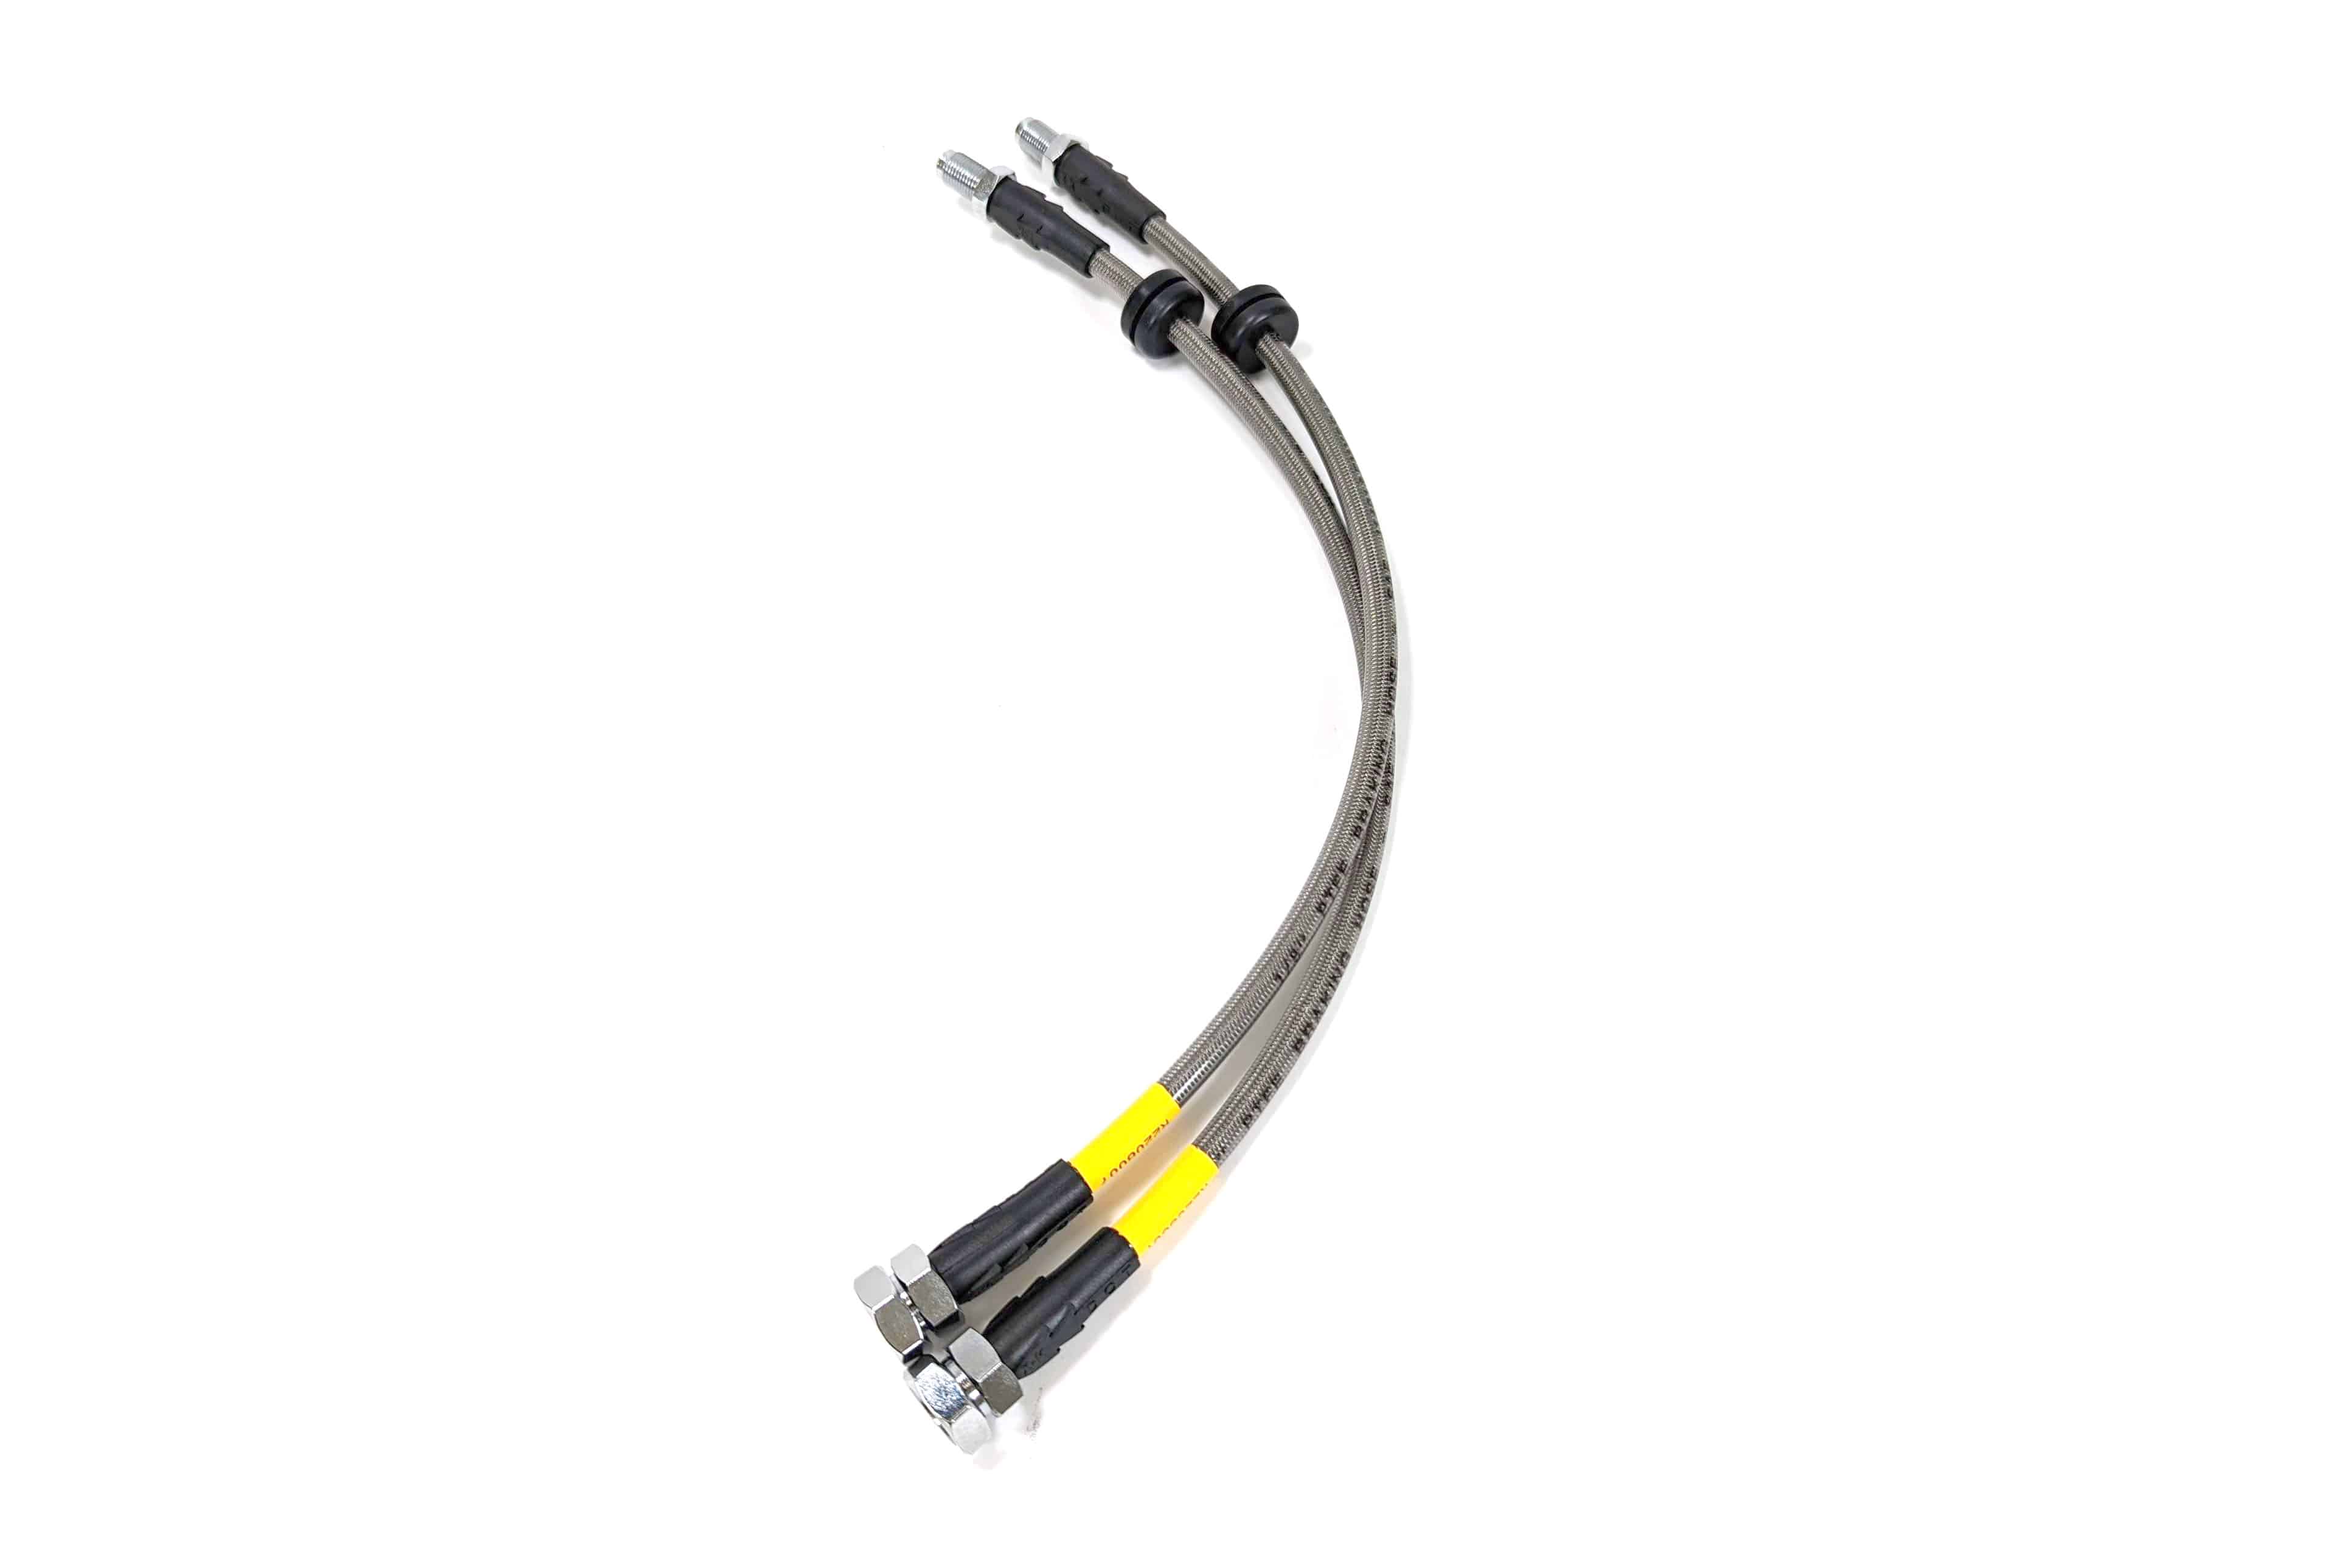 Mazdaspeed 3 brake lines are Protected with a clear PVC coating to keep the braiding free of moisture and debris. Filigree Racing, StopTech, Edge Autosport, Damond Motorsports, Good-Win Racing, Street Unit, Cobb, Racing Beat.